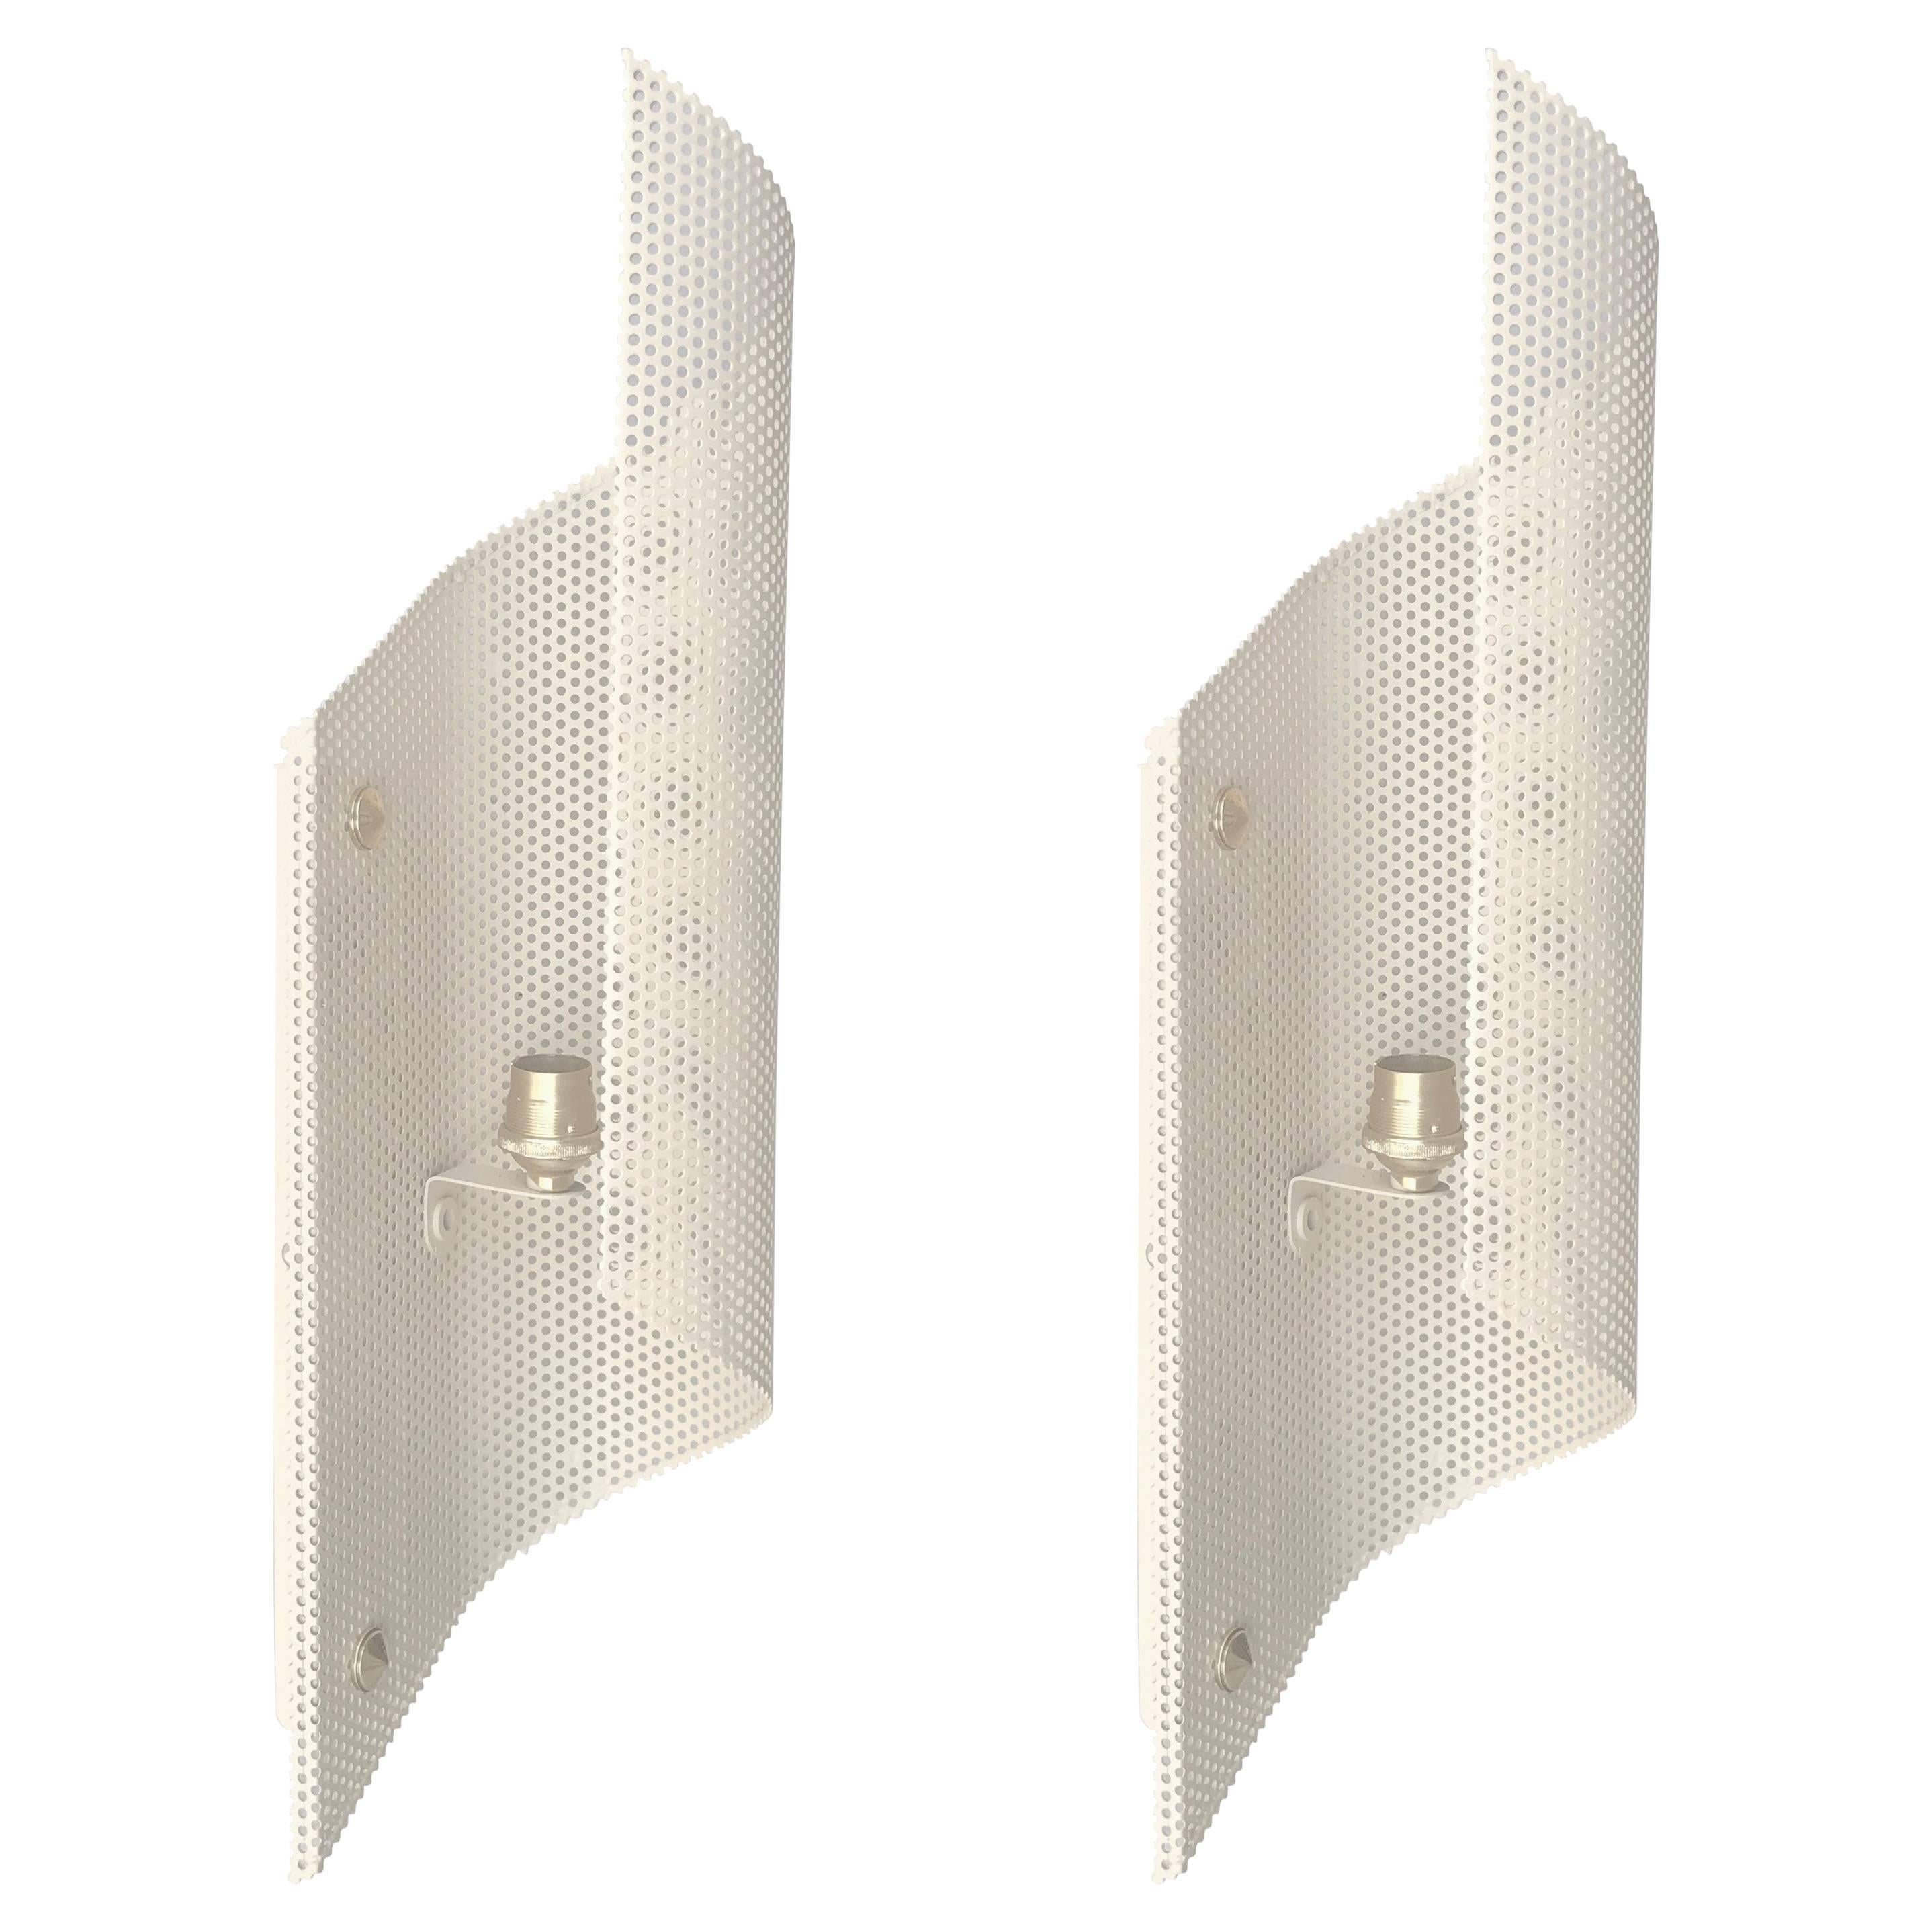 Pair of Mathieu Mategot Sconces French Mid-Century Modern 